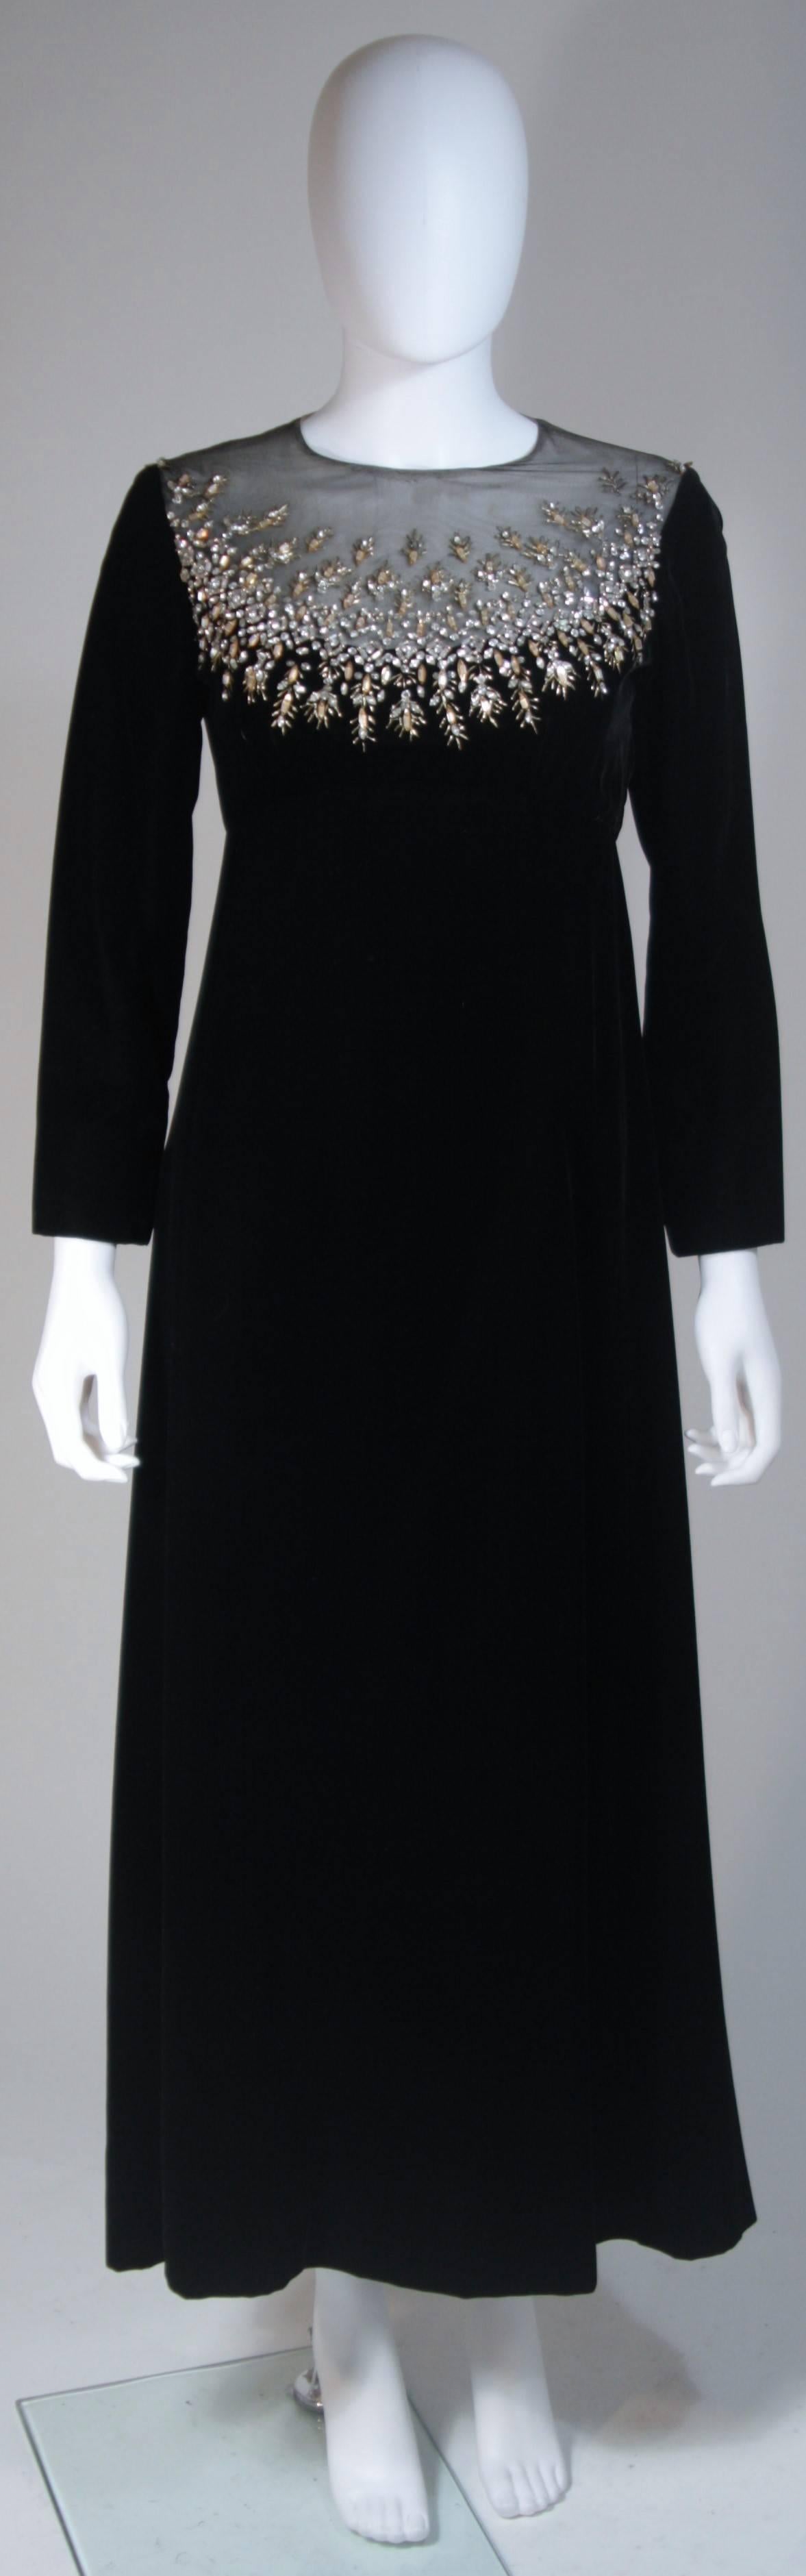  This Malcolm Starr  gown is composed of a black velvet and features a sheer neckline with rhinestone applique. There is a center back zipper. In excellent vintage condition. 

  **Please cross-reference measurements for personal accuracy.